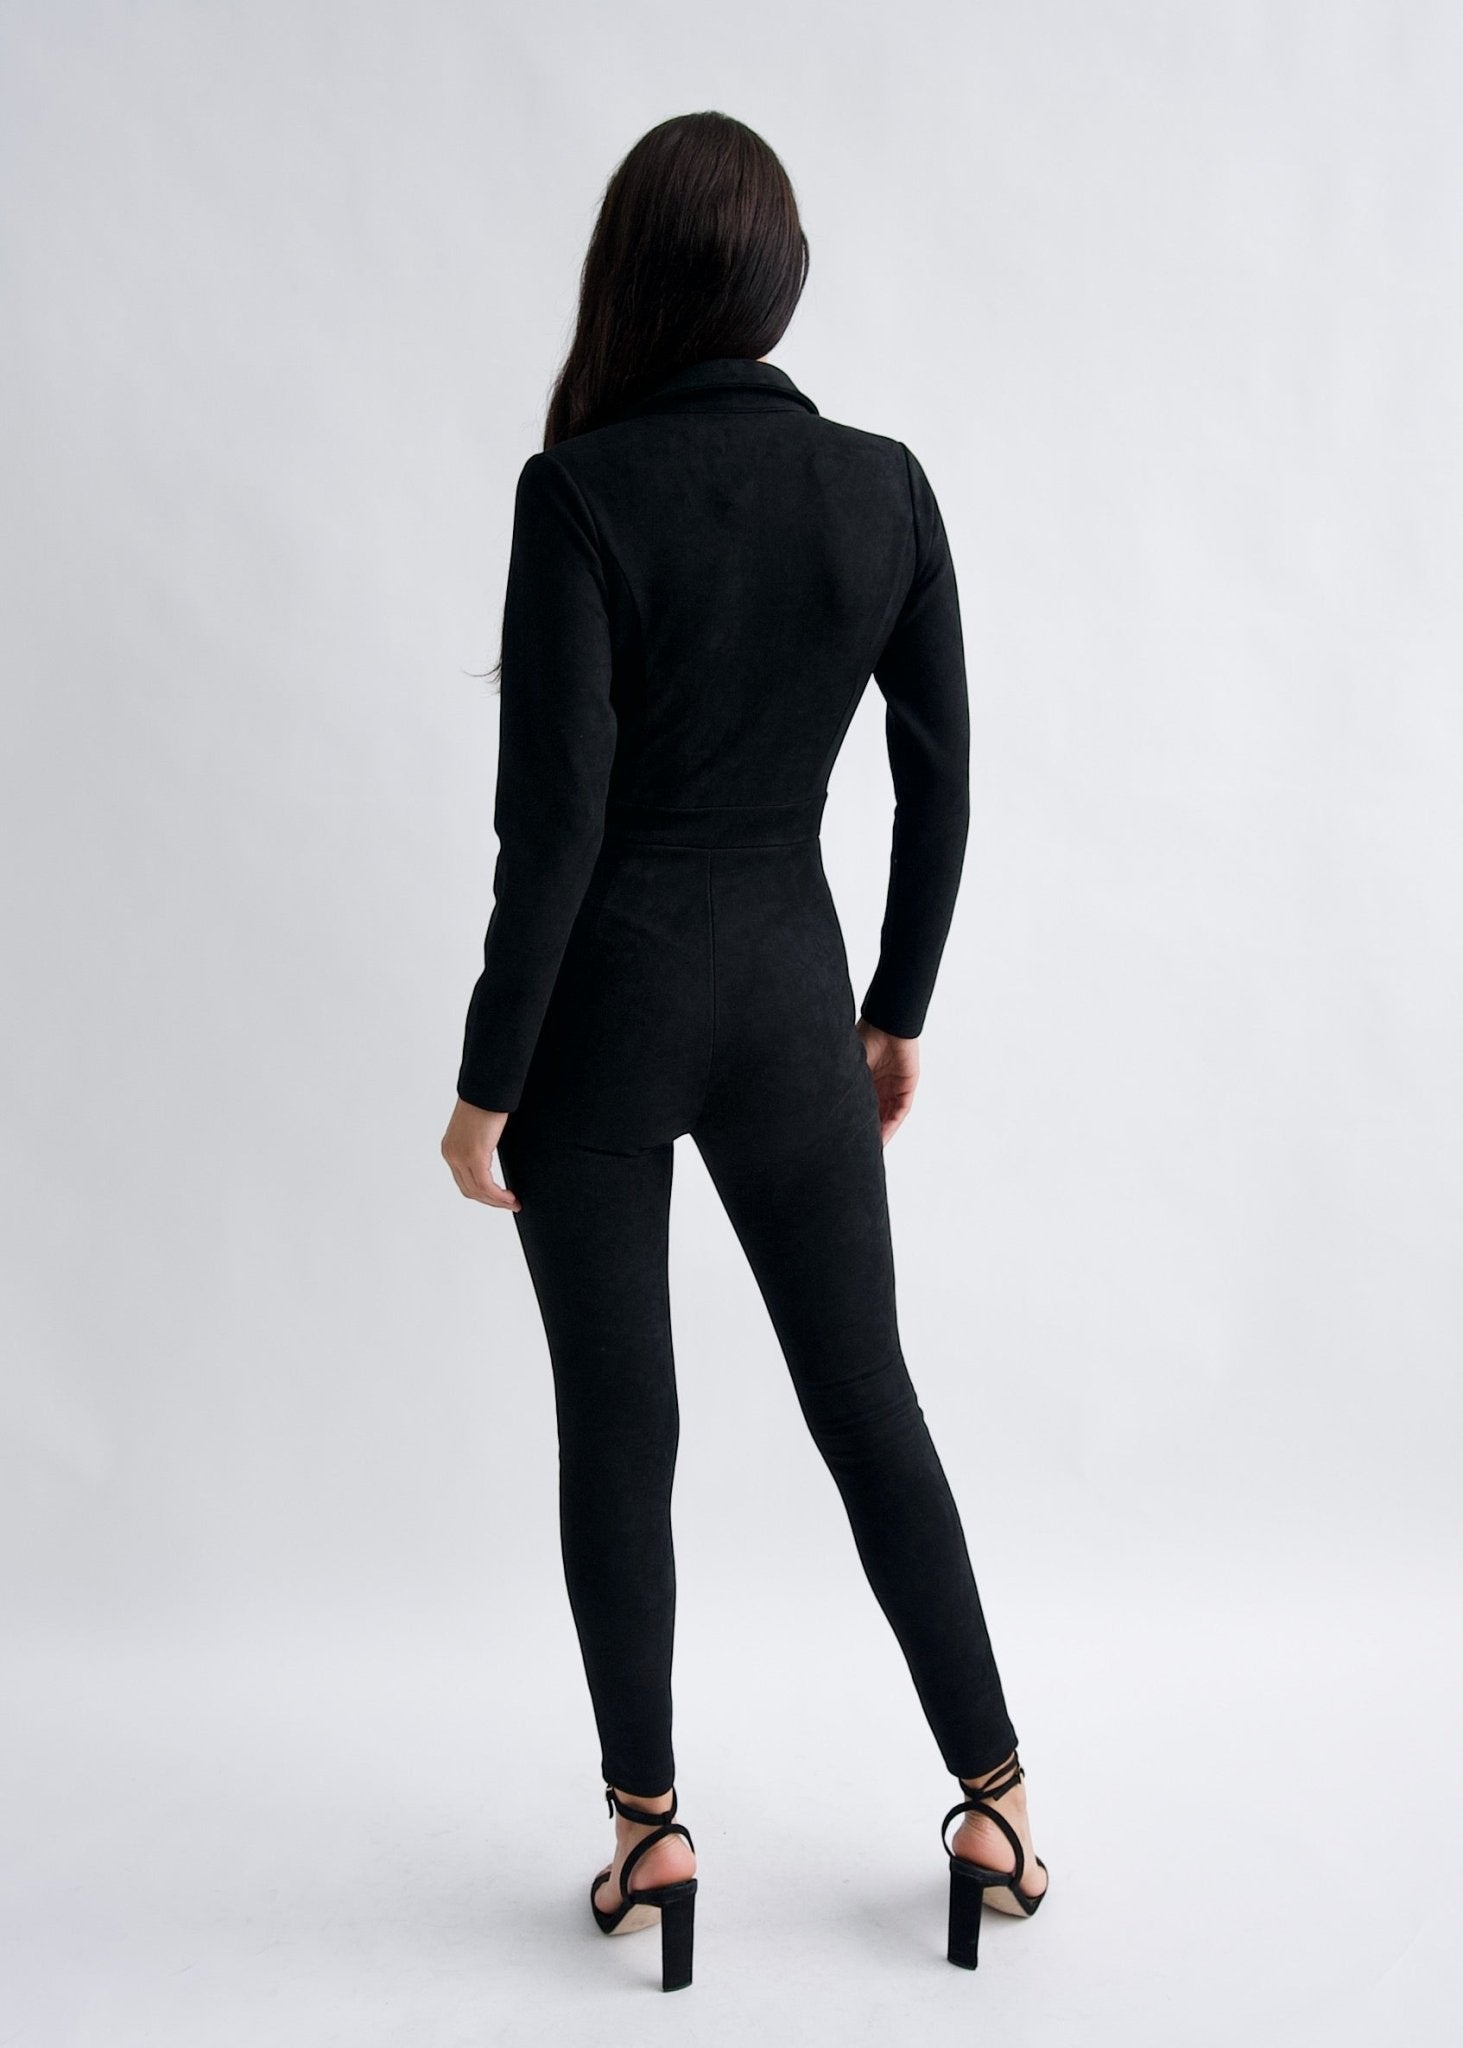 "Emma Peel" Black Faux Suede Jumpsuit-Why Mary-stride